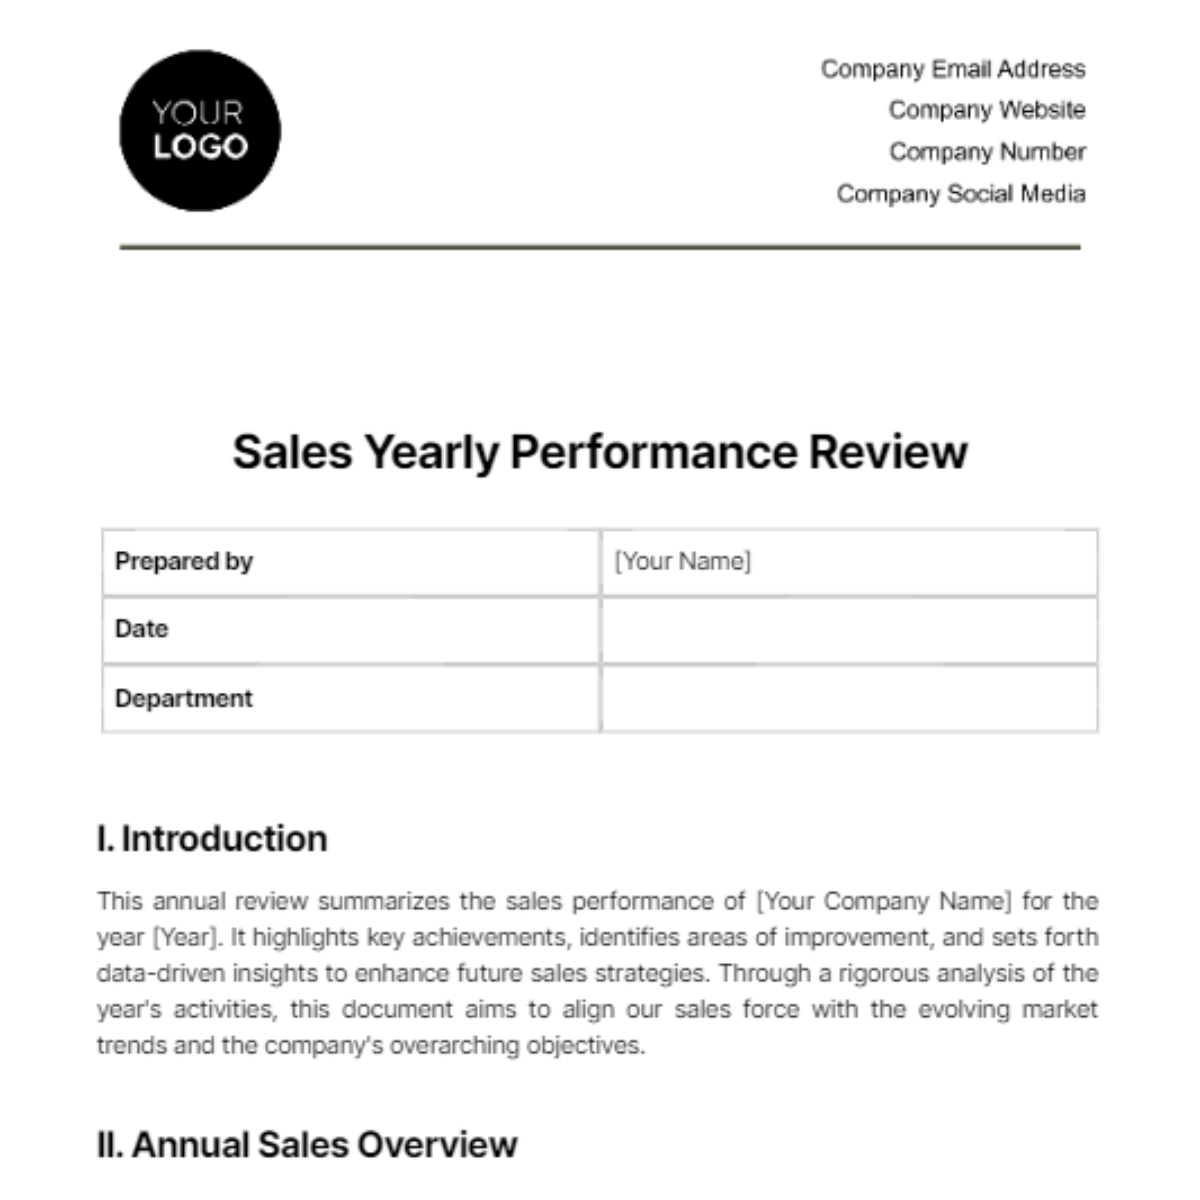 Sales Yearly Performance Review Template